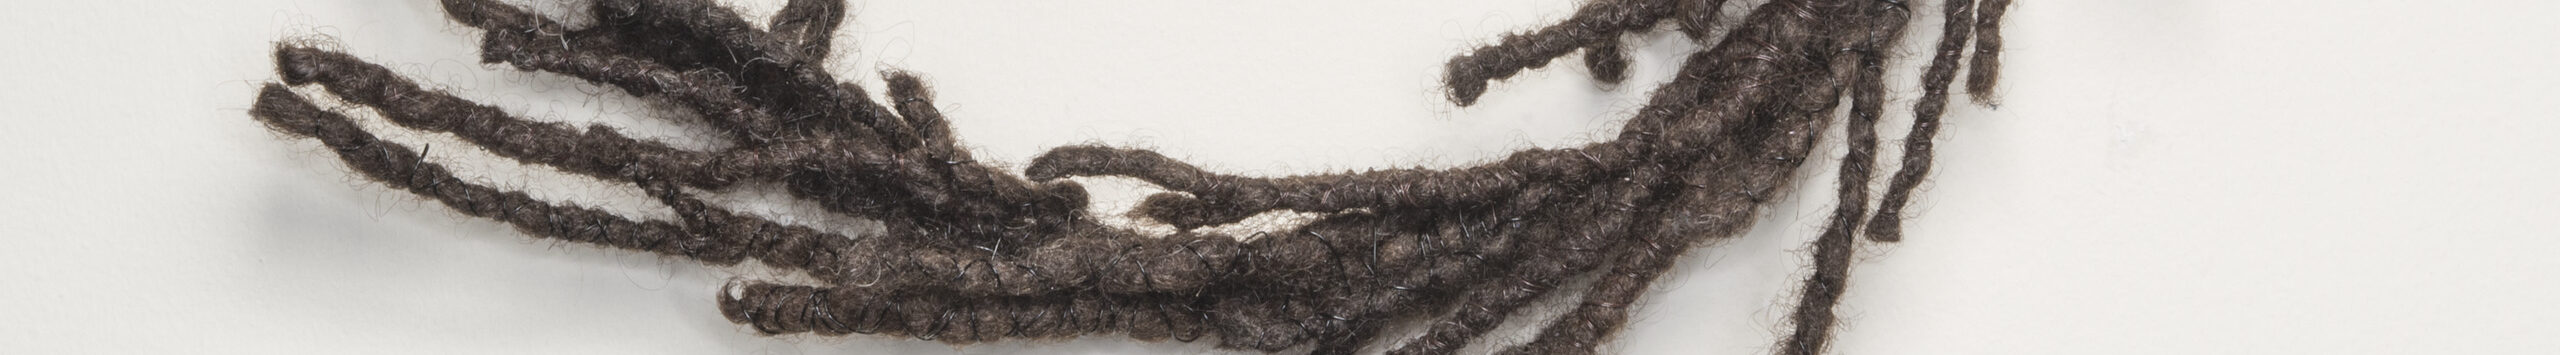 A circular wreath made of dark, tightly coiled hair with strands escaping and resembling laurels.